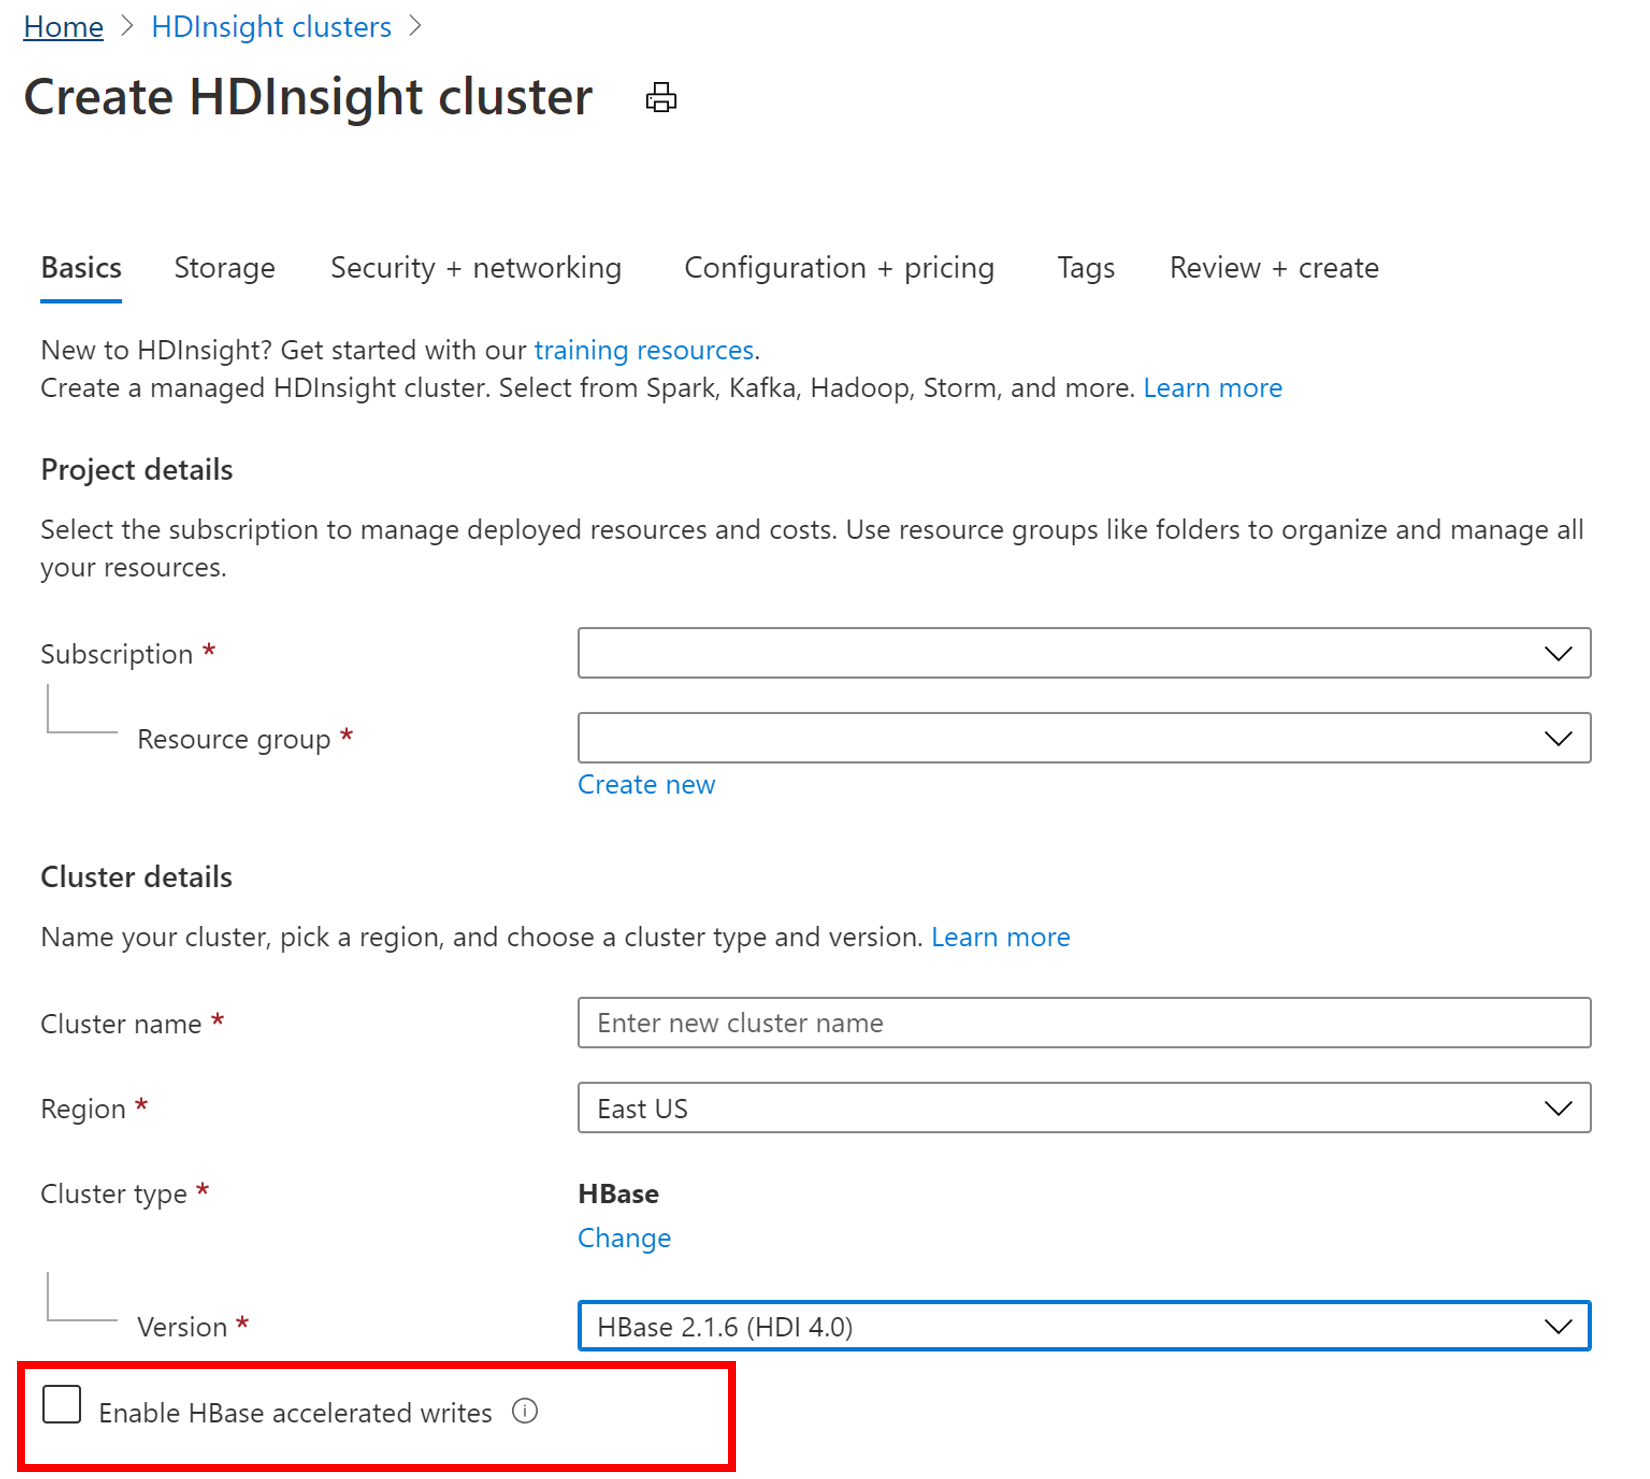 Enable accelerated writes option for HDInsight Apache HBase